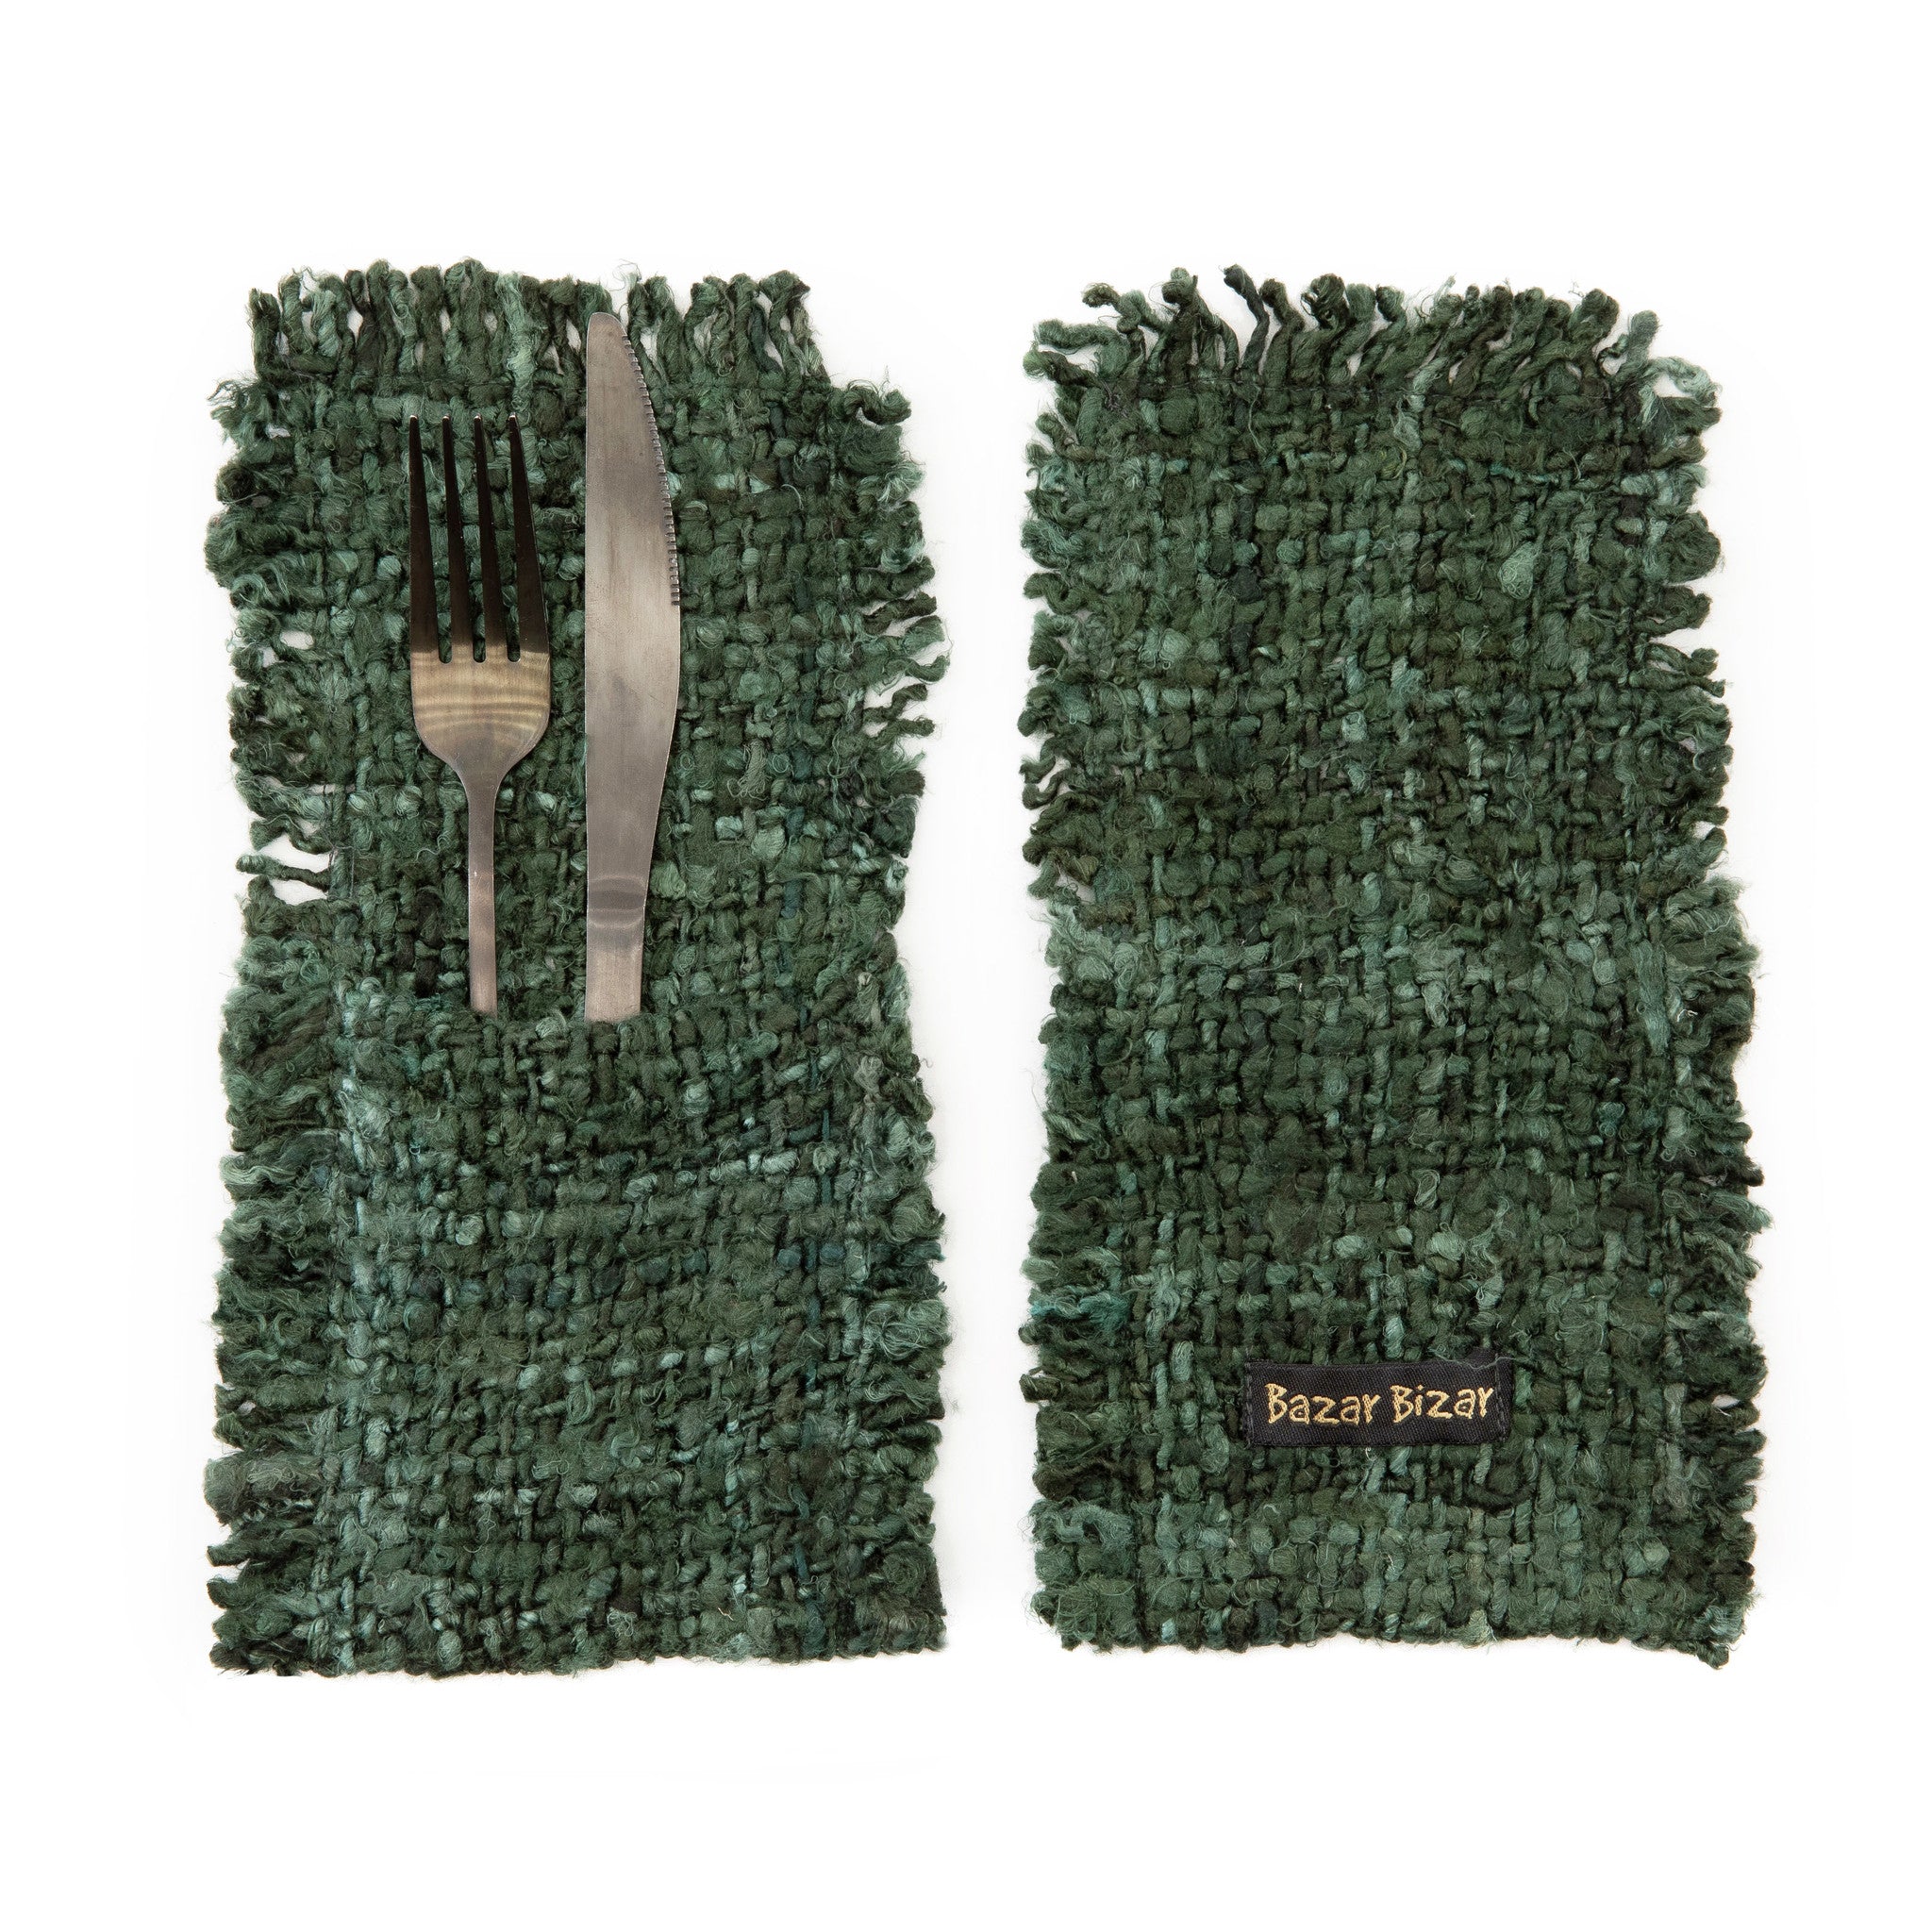 THE OH MY GEE Cutlery Holder Set of 4 forest green